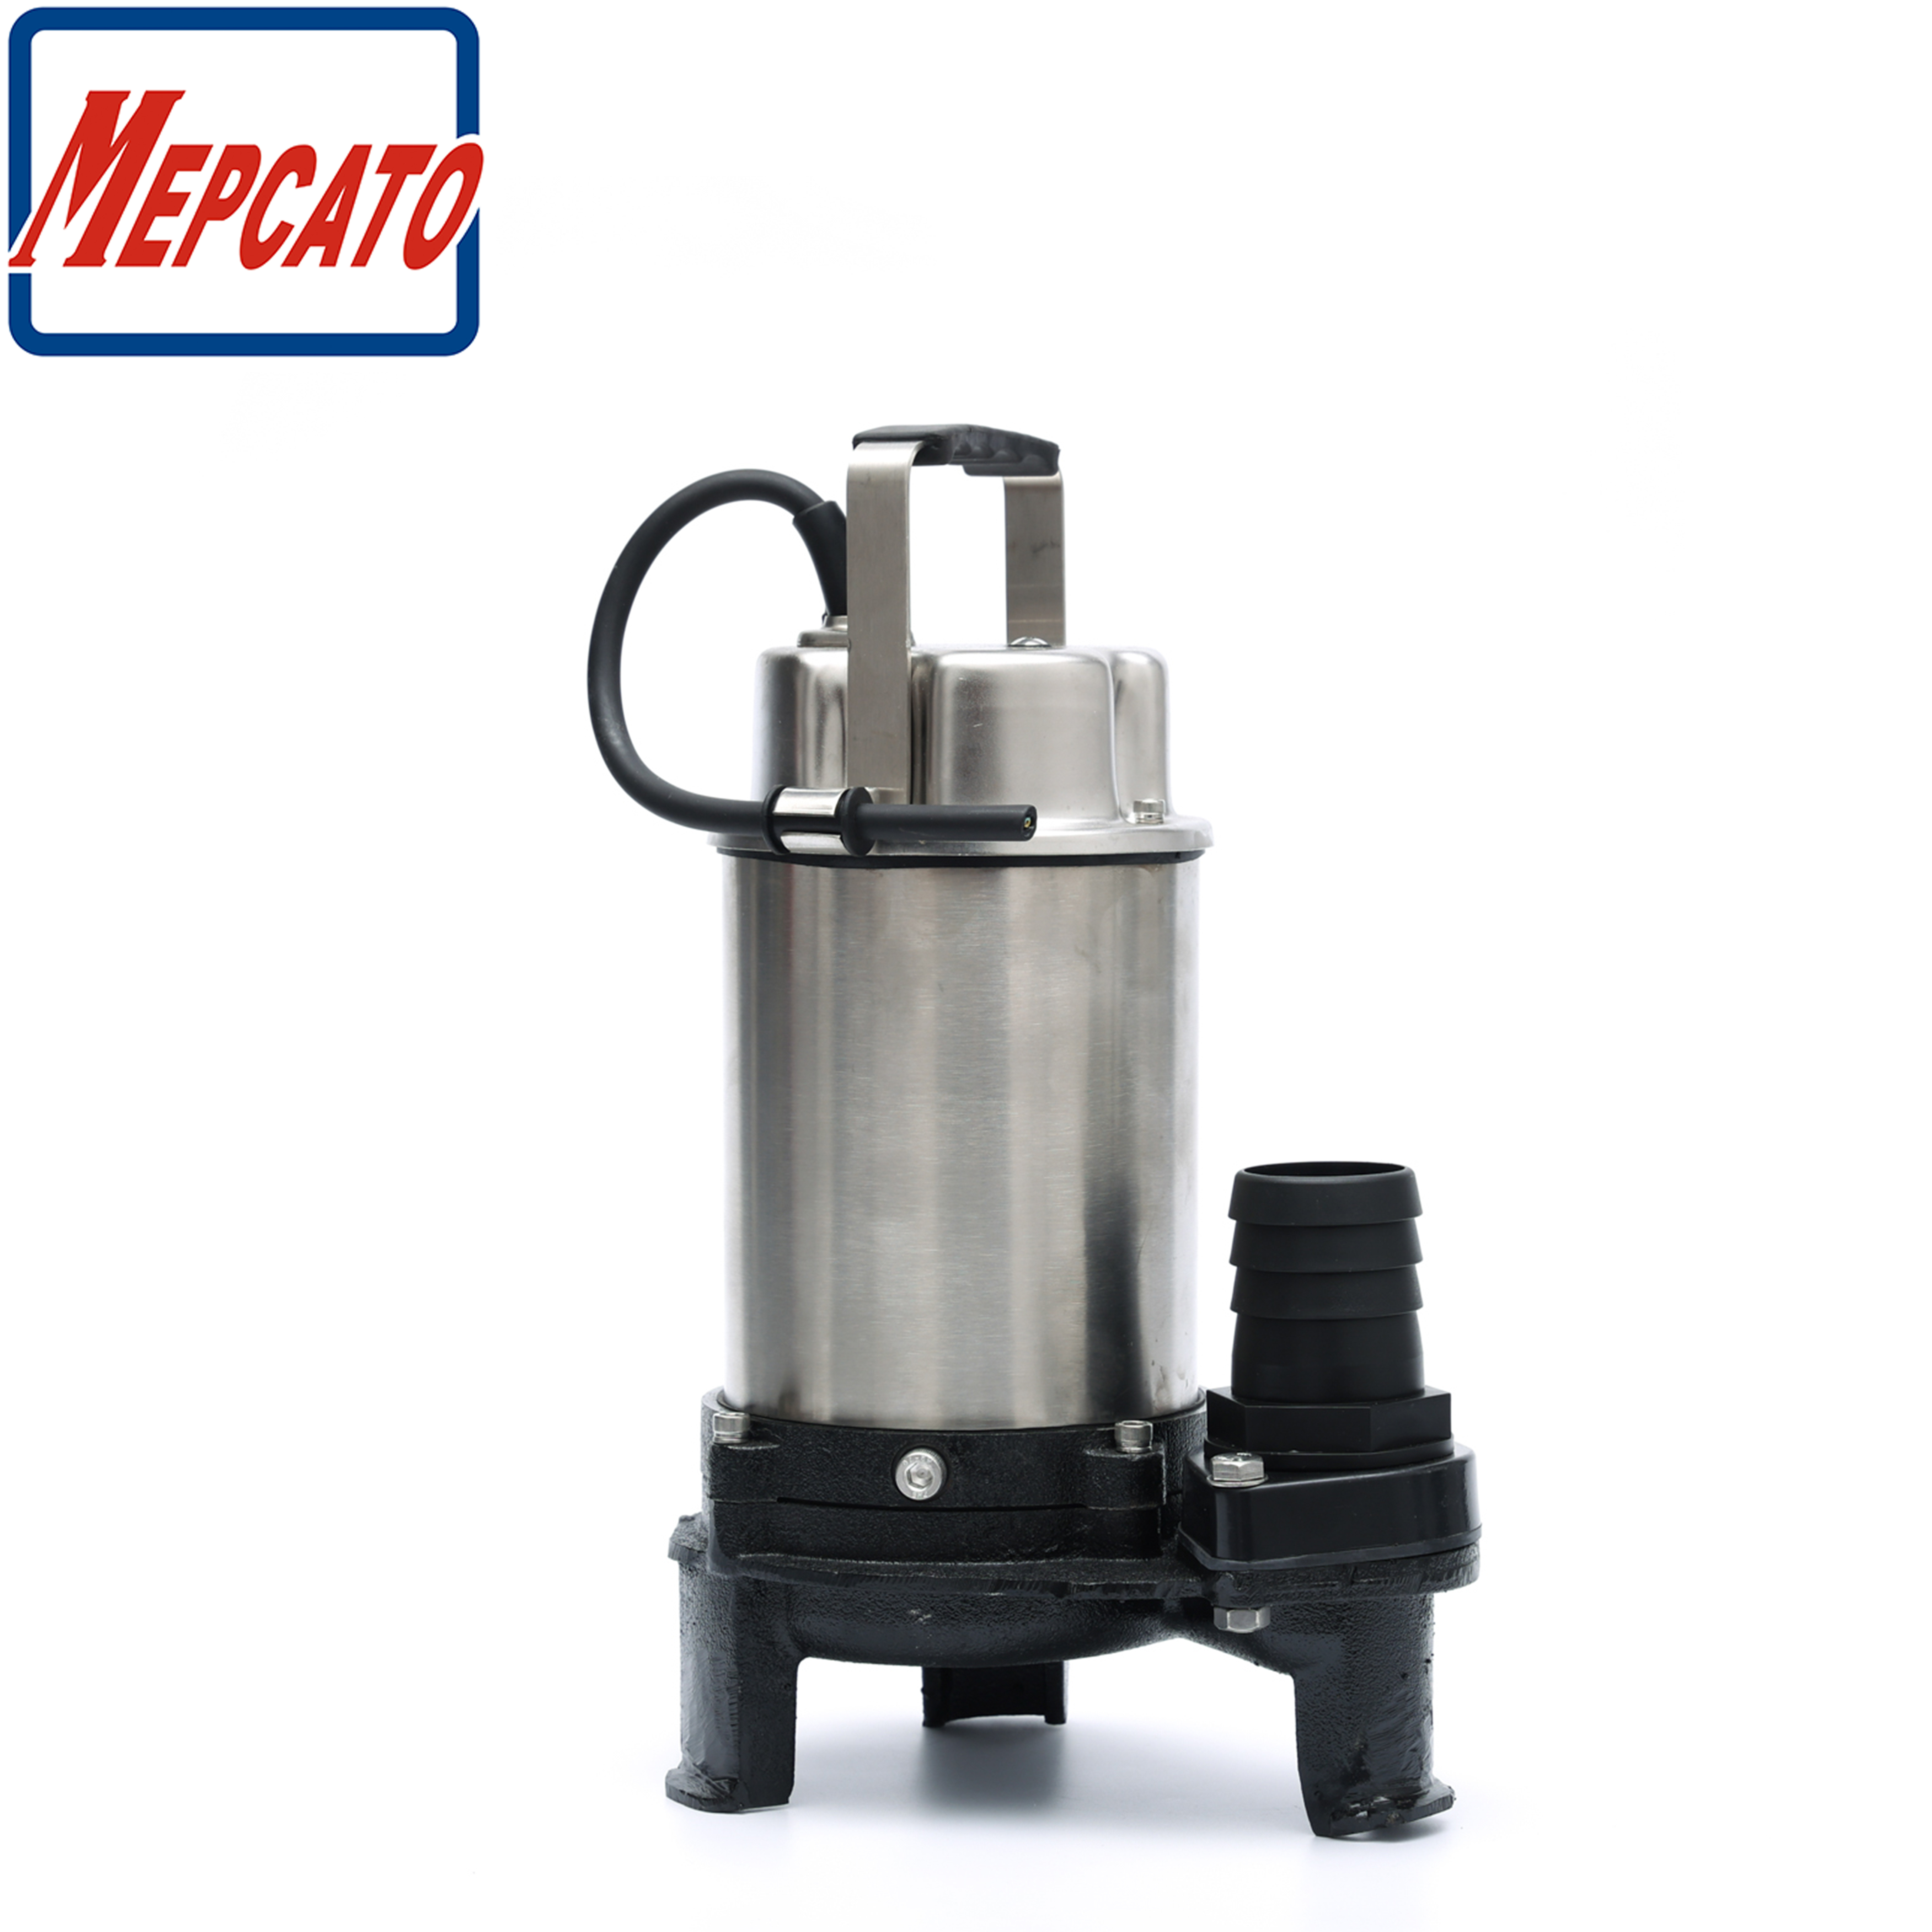 MS Series Wastewater Submersible Pump with Cutter